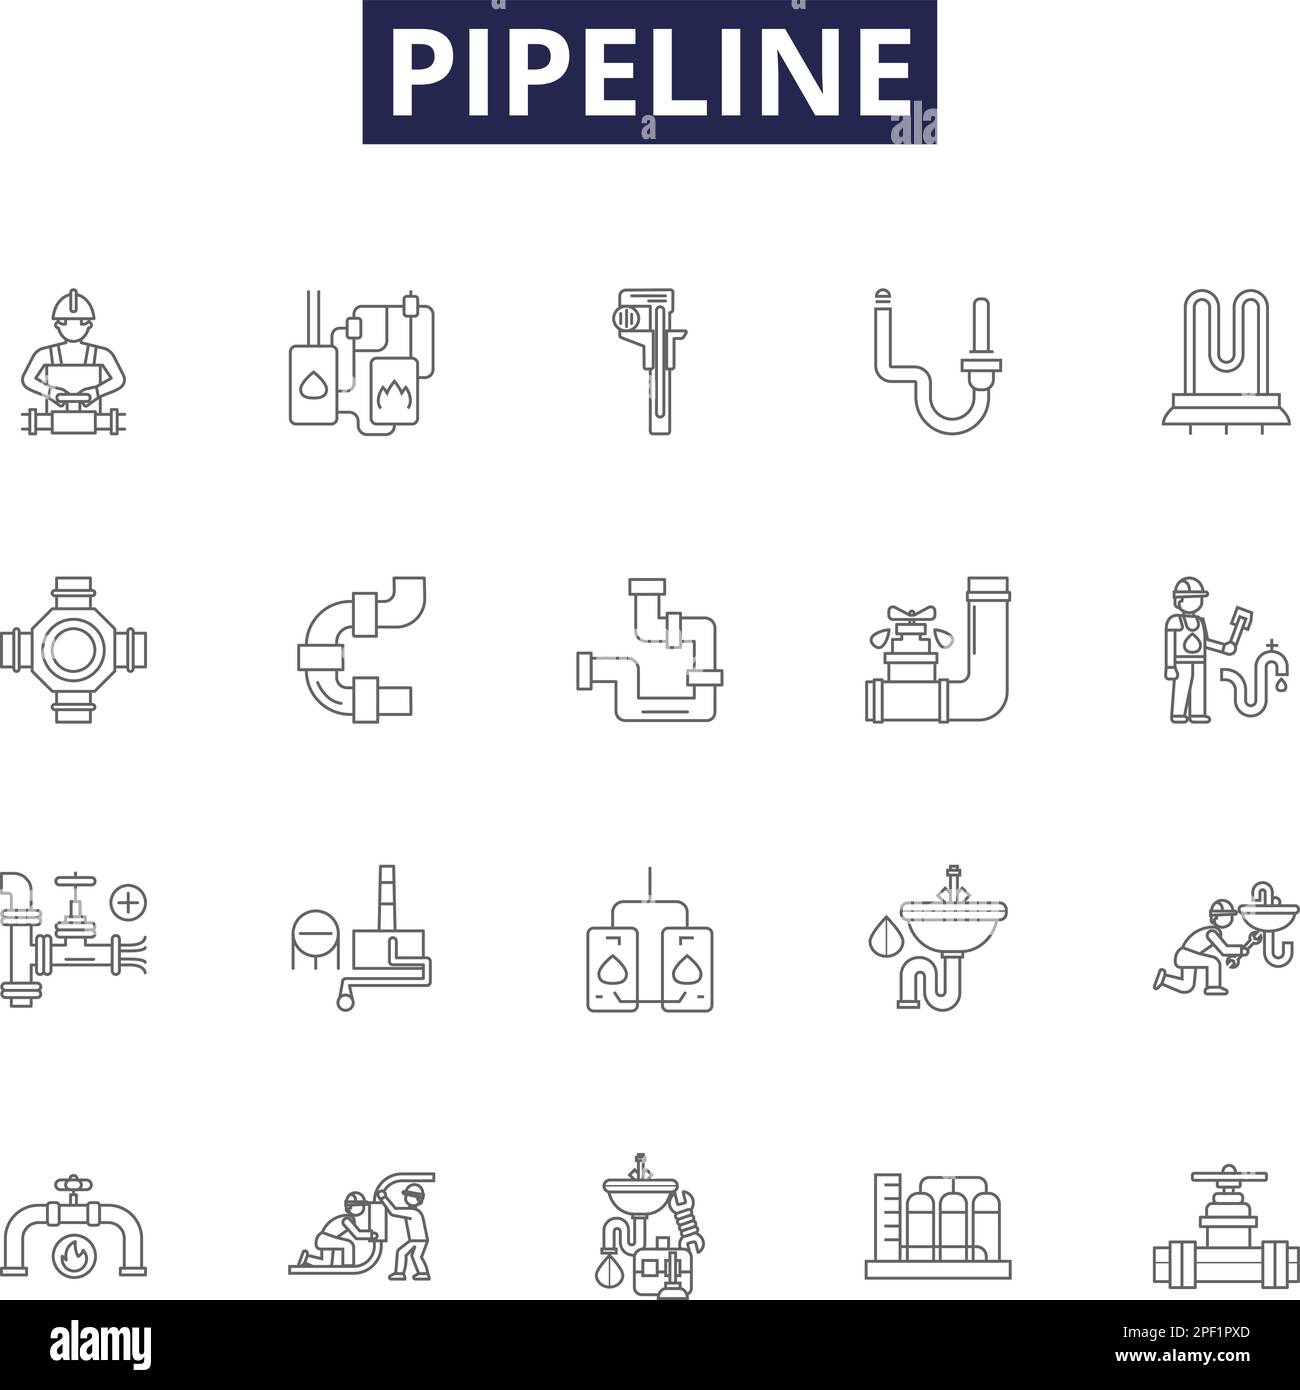 Pipeline line vector icons and signs. Pipeline, Conduit, Line, Flow, Channel, Main, Network, Aqueduct outline vector illustration set Stock Vector